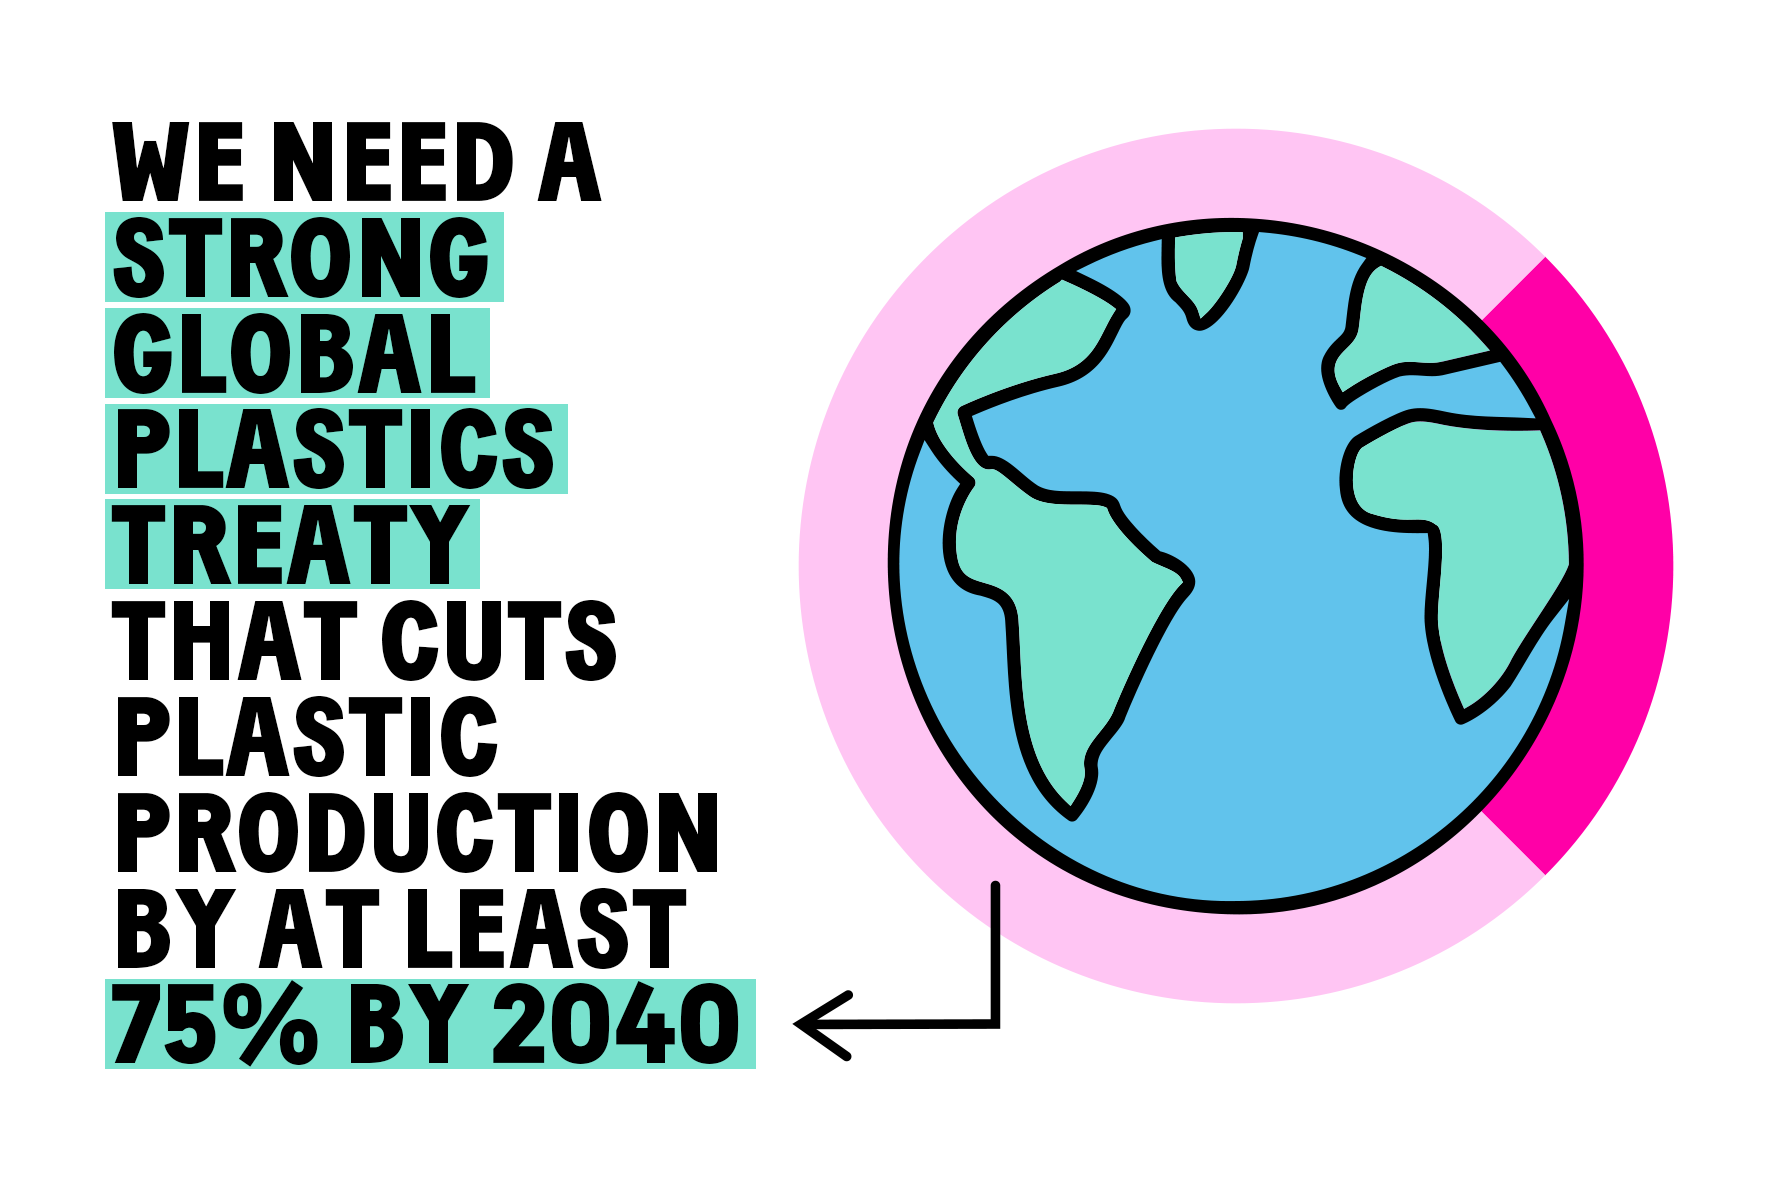 We need a strong Global Plastics Treaty that cuts plastic production by at least 75% by 2040